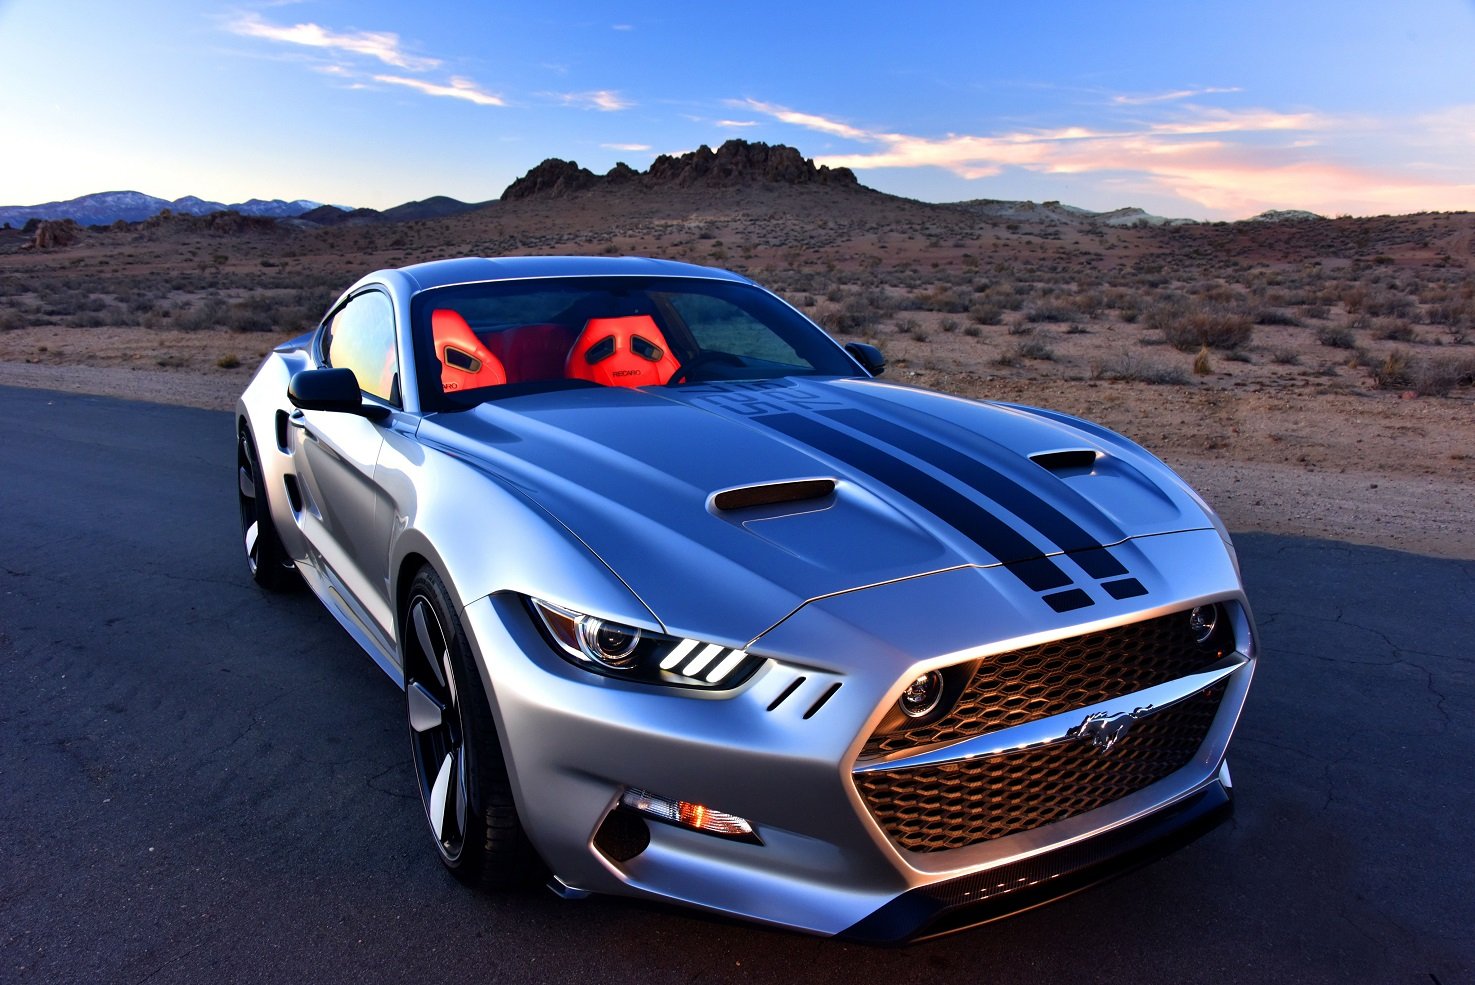 2016, Galpin, Auto, Sports, Rocket, Ford, Mustang, Cars, Modified Wallpaper